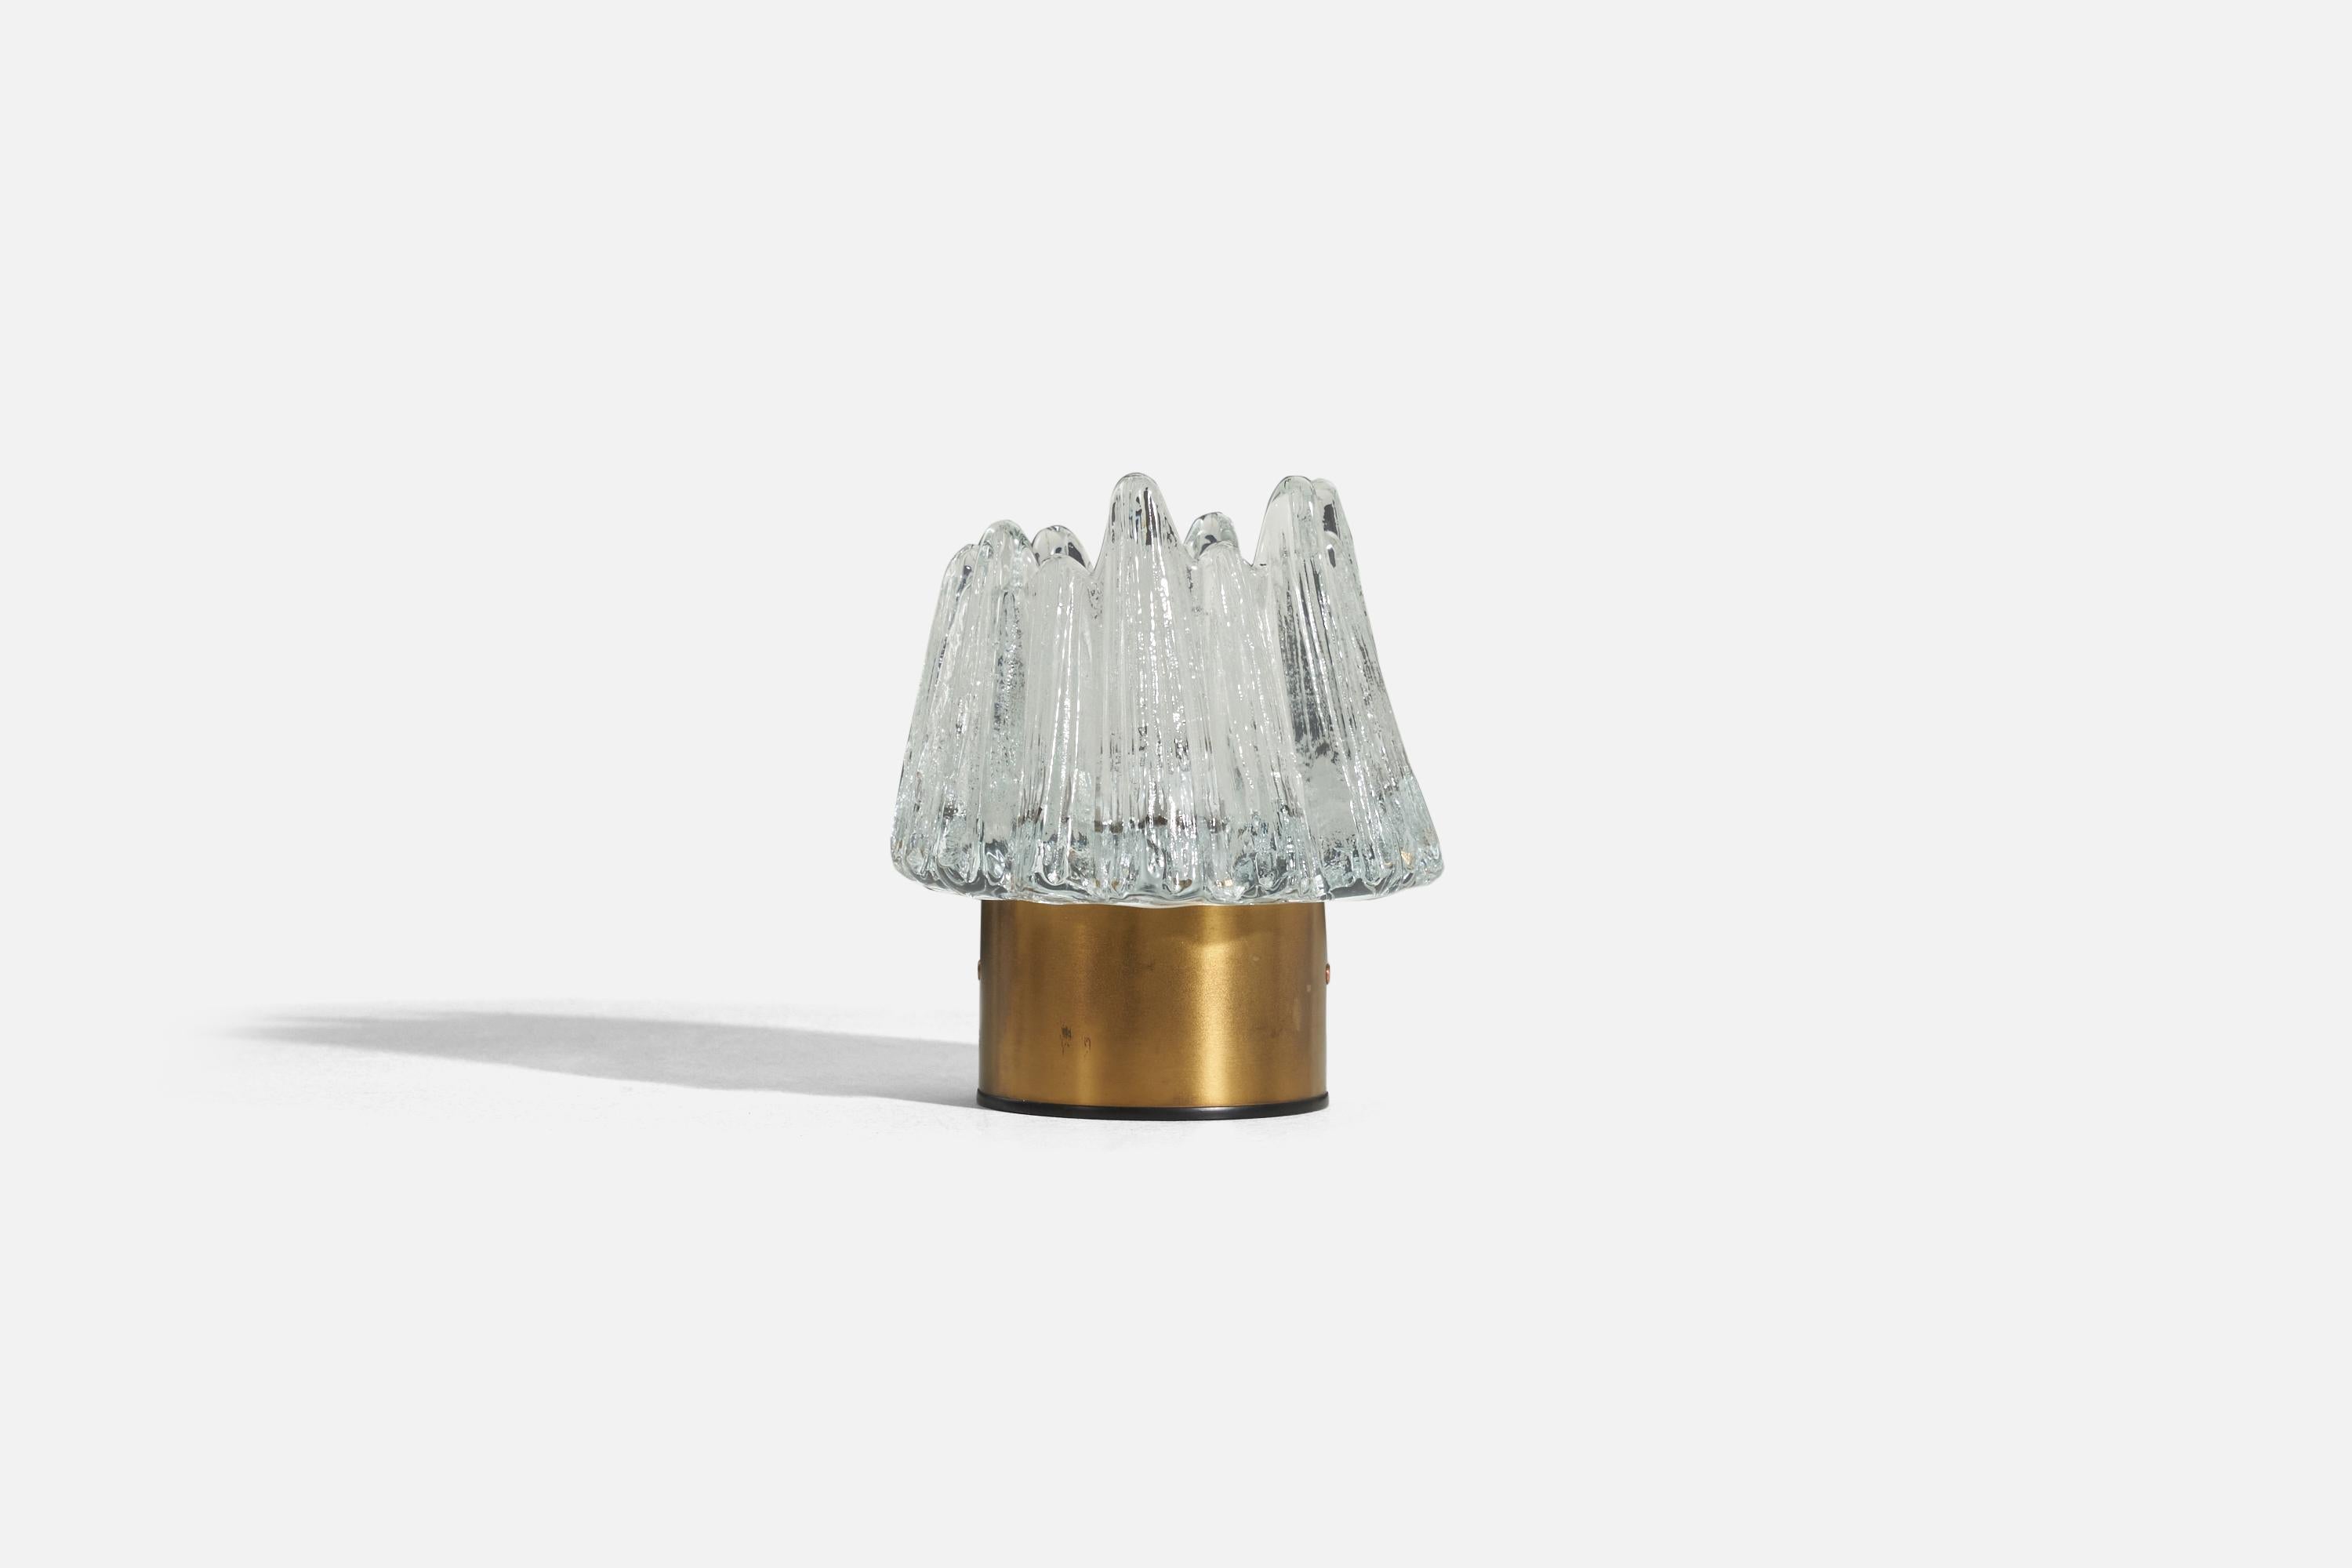 A brass and textured glass table lamp designed and produced by NAFA, Sweden, c. 1960s.

